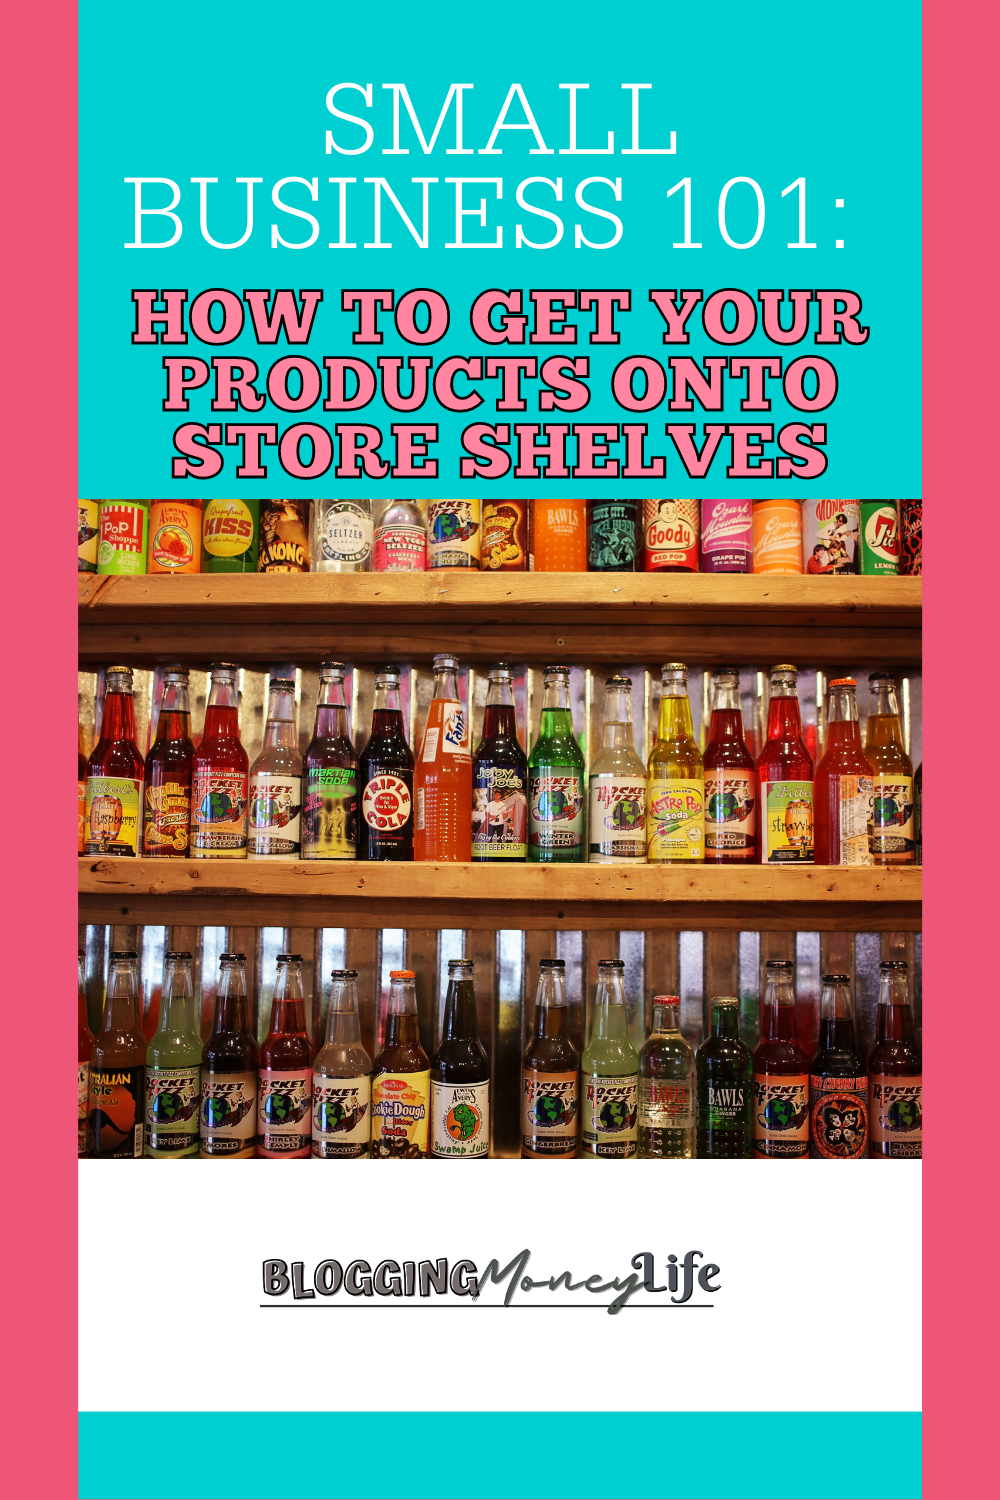 Small Business 101: How to Get Your Products Onto Store Shelves